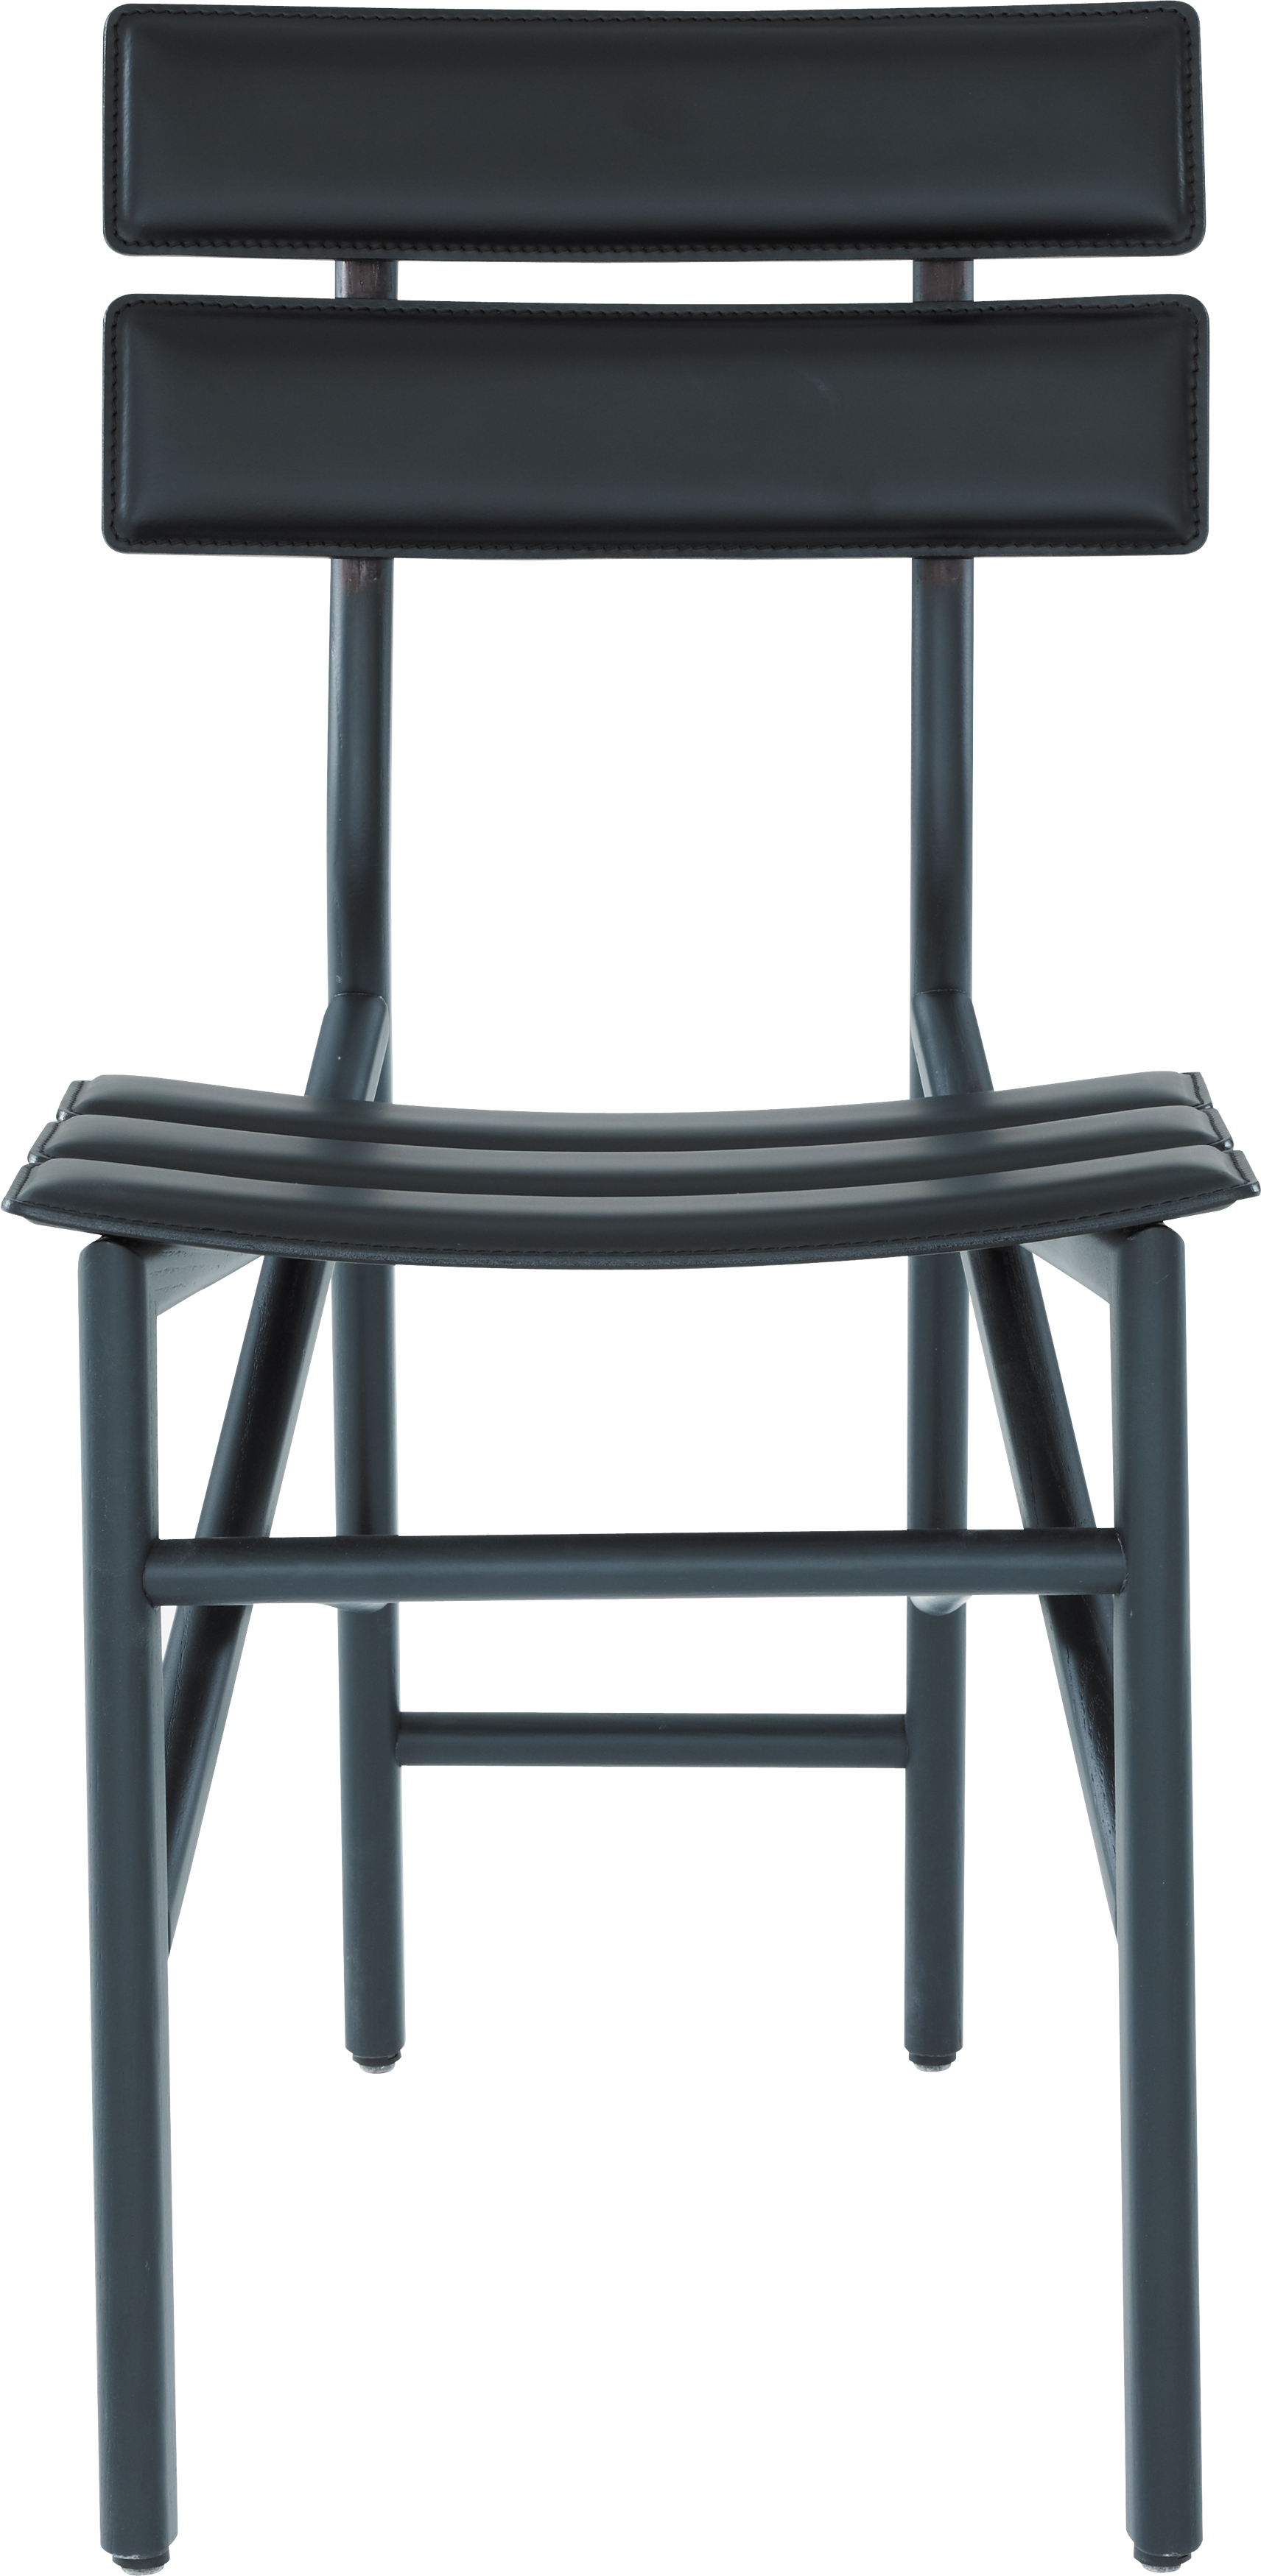 Chair PNG image transparent image download, size: 1712x3498px